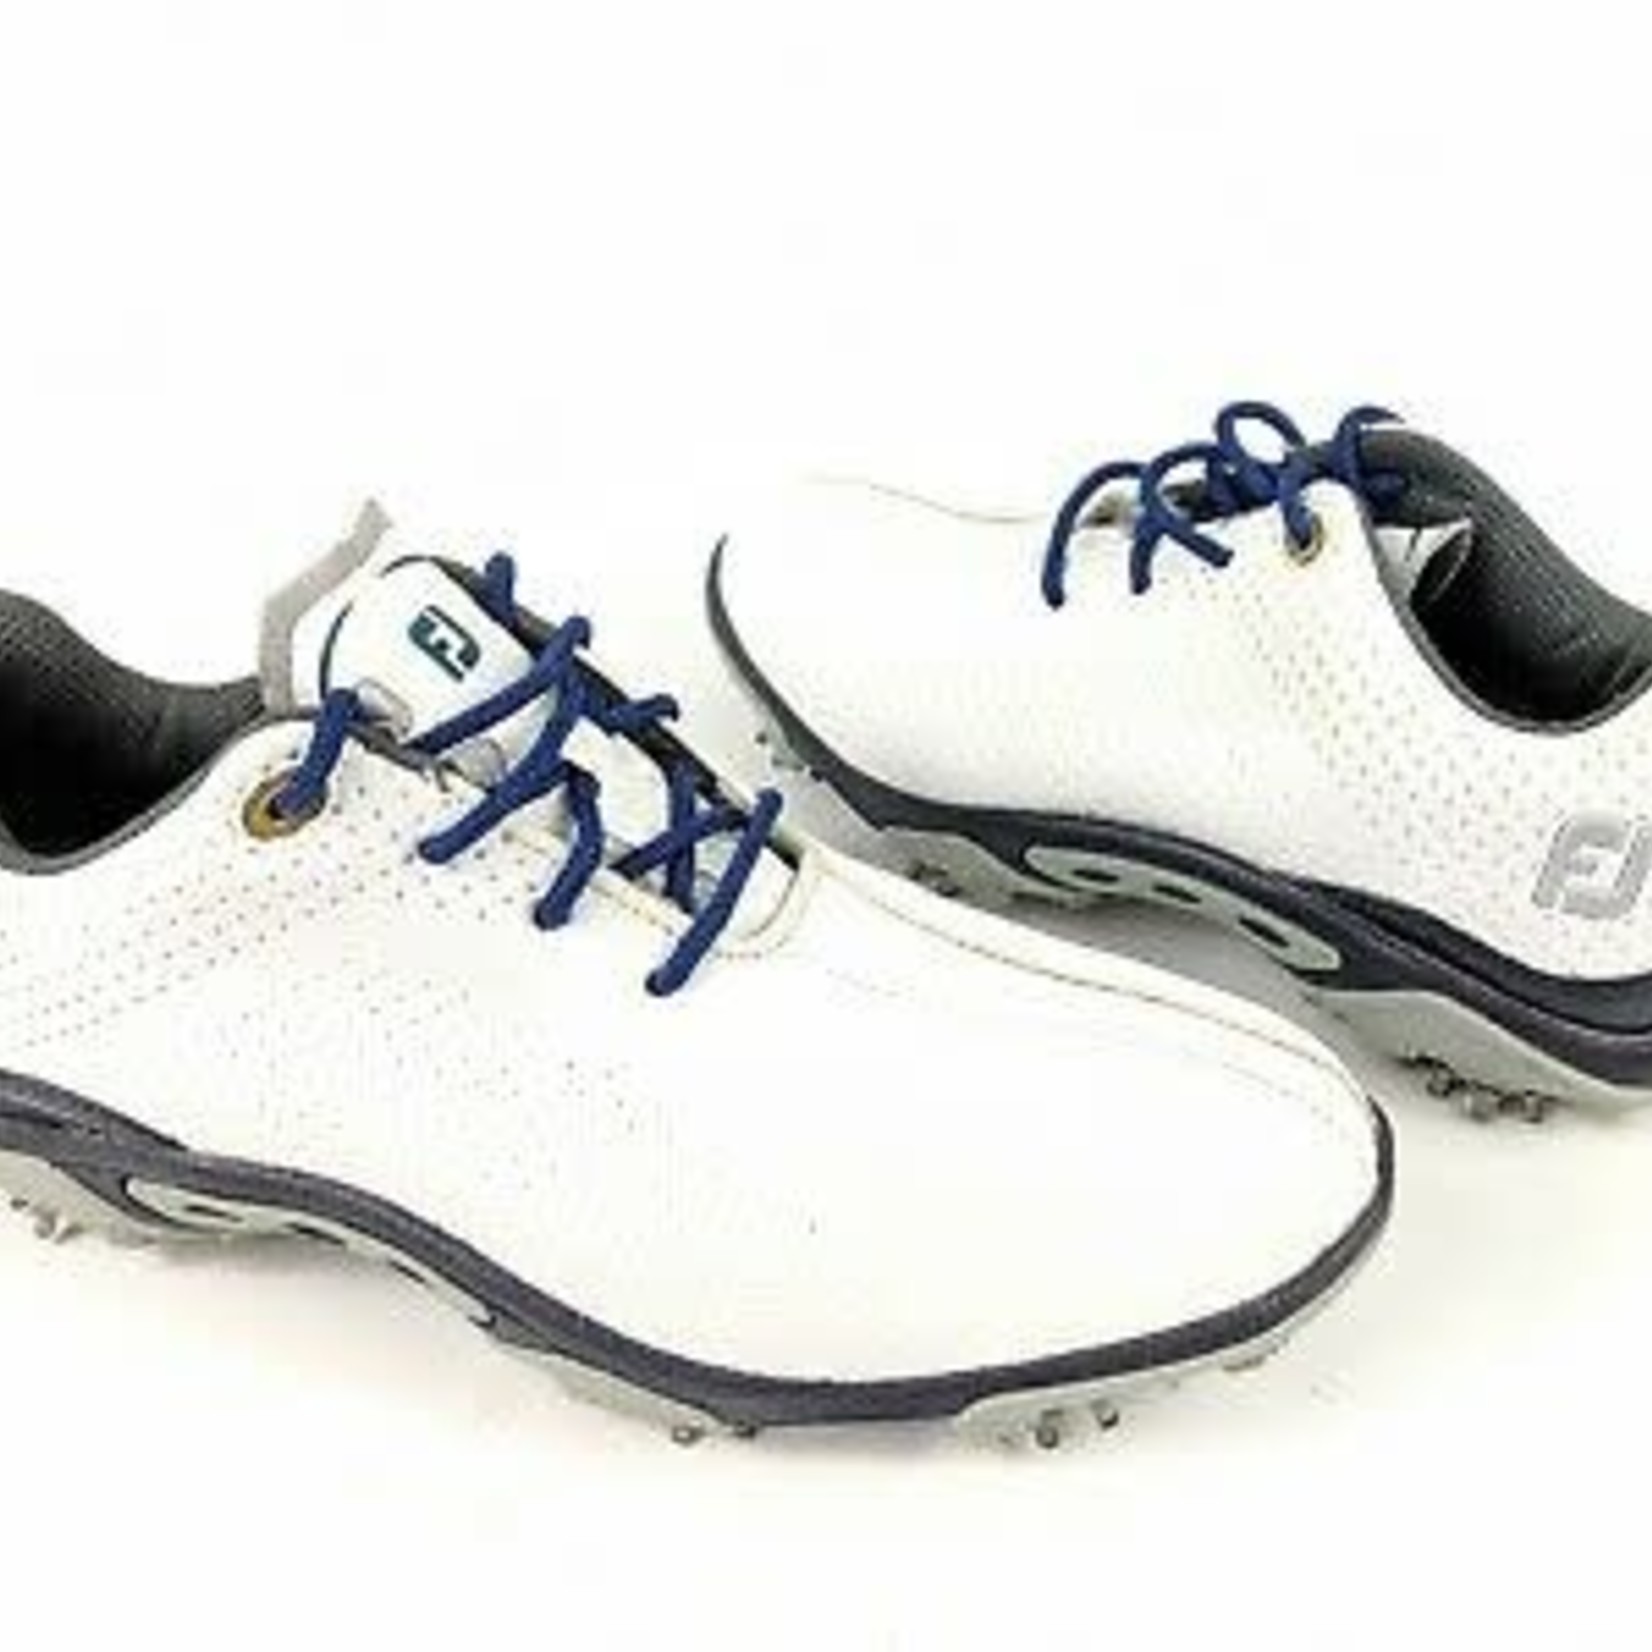 Golf Shoe Fitting Guide: Learn How Golf Shoes Should Fit